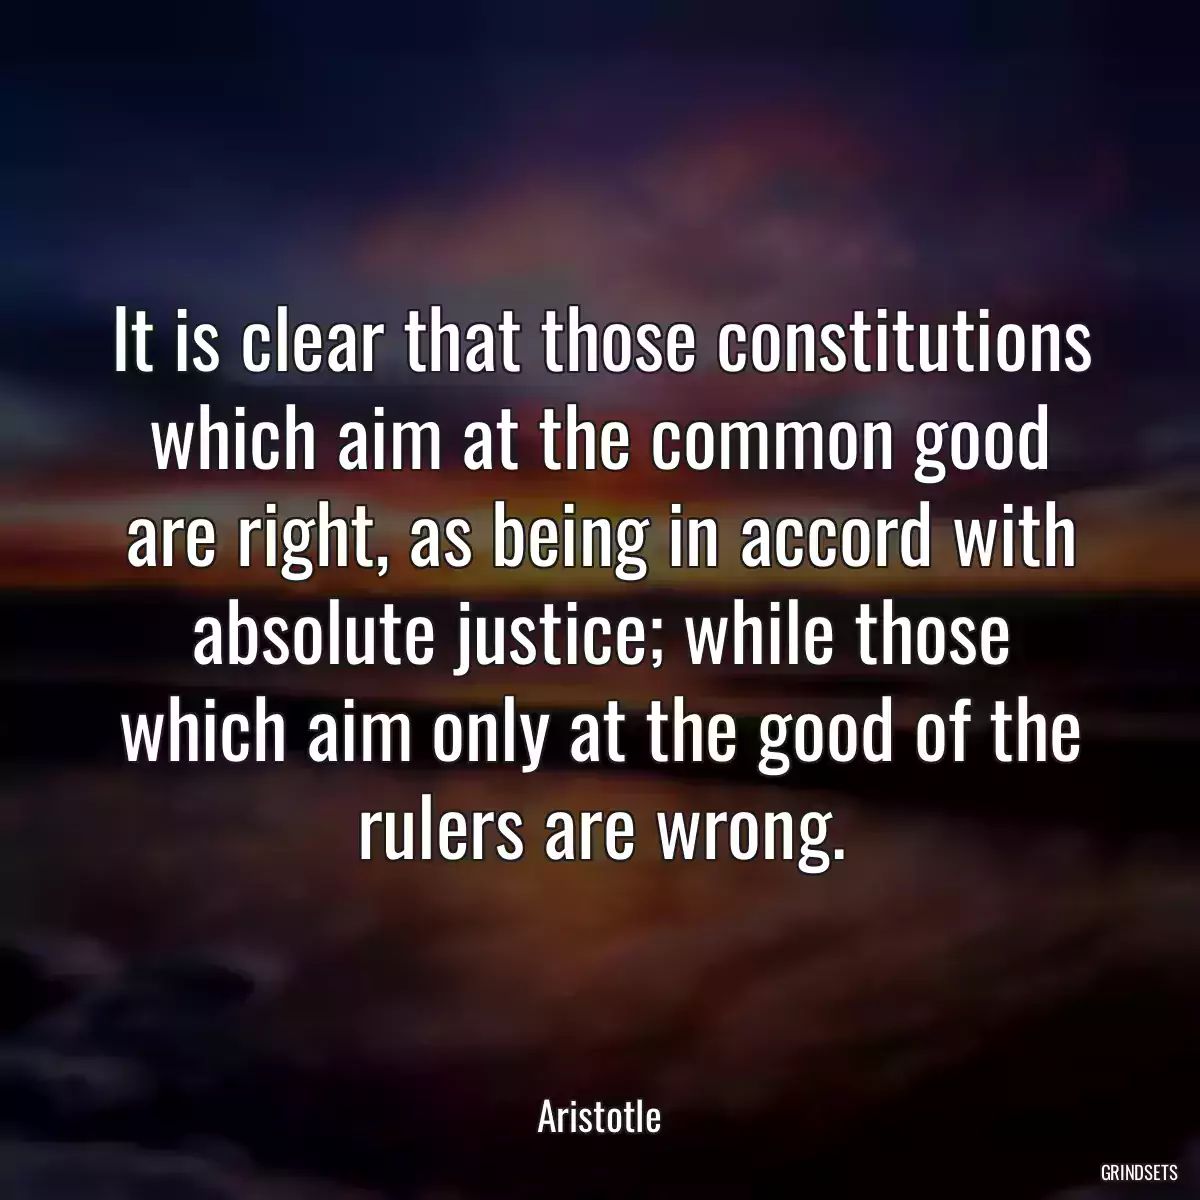 It is clear that those constitutions which aim at the common good are right, as being in accord with absolute justice; while those which aim only at the good of the rulers are wrong.